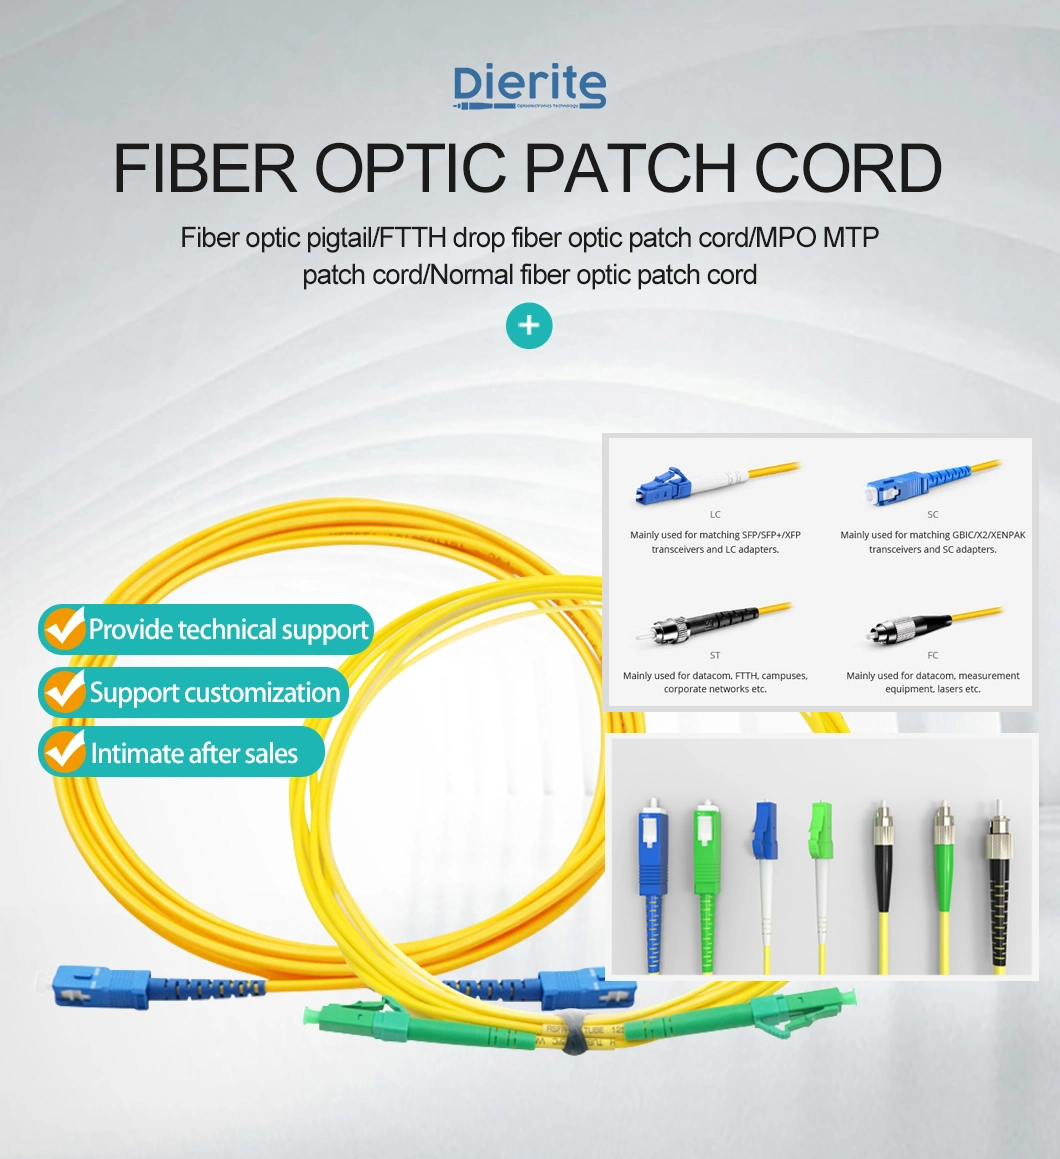 5% off Sc APC Upc 12 12 Cord Multimode/Singlemode Fibers Unjacketed Color-Coded Pigtail for Telecommunication Networks